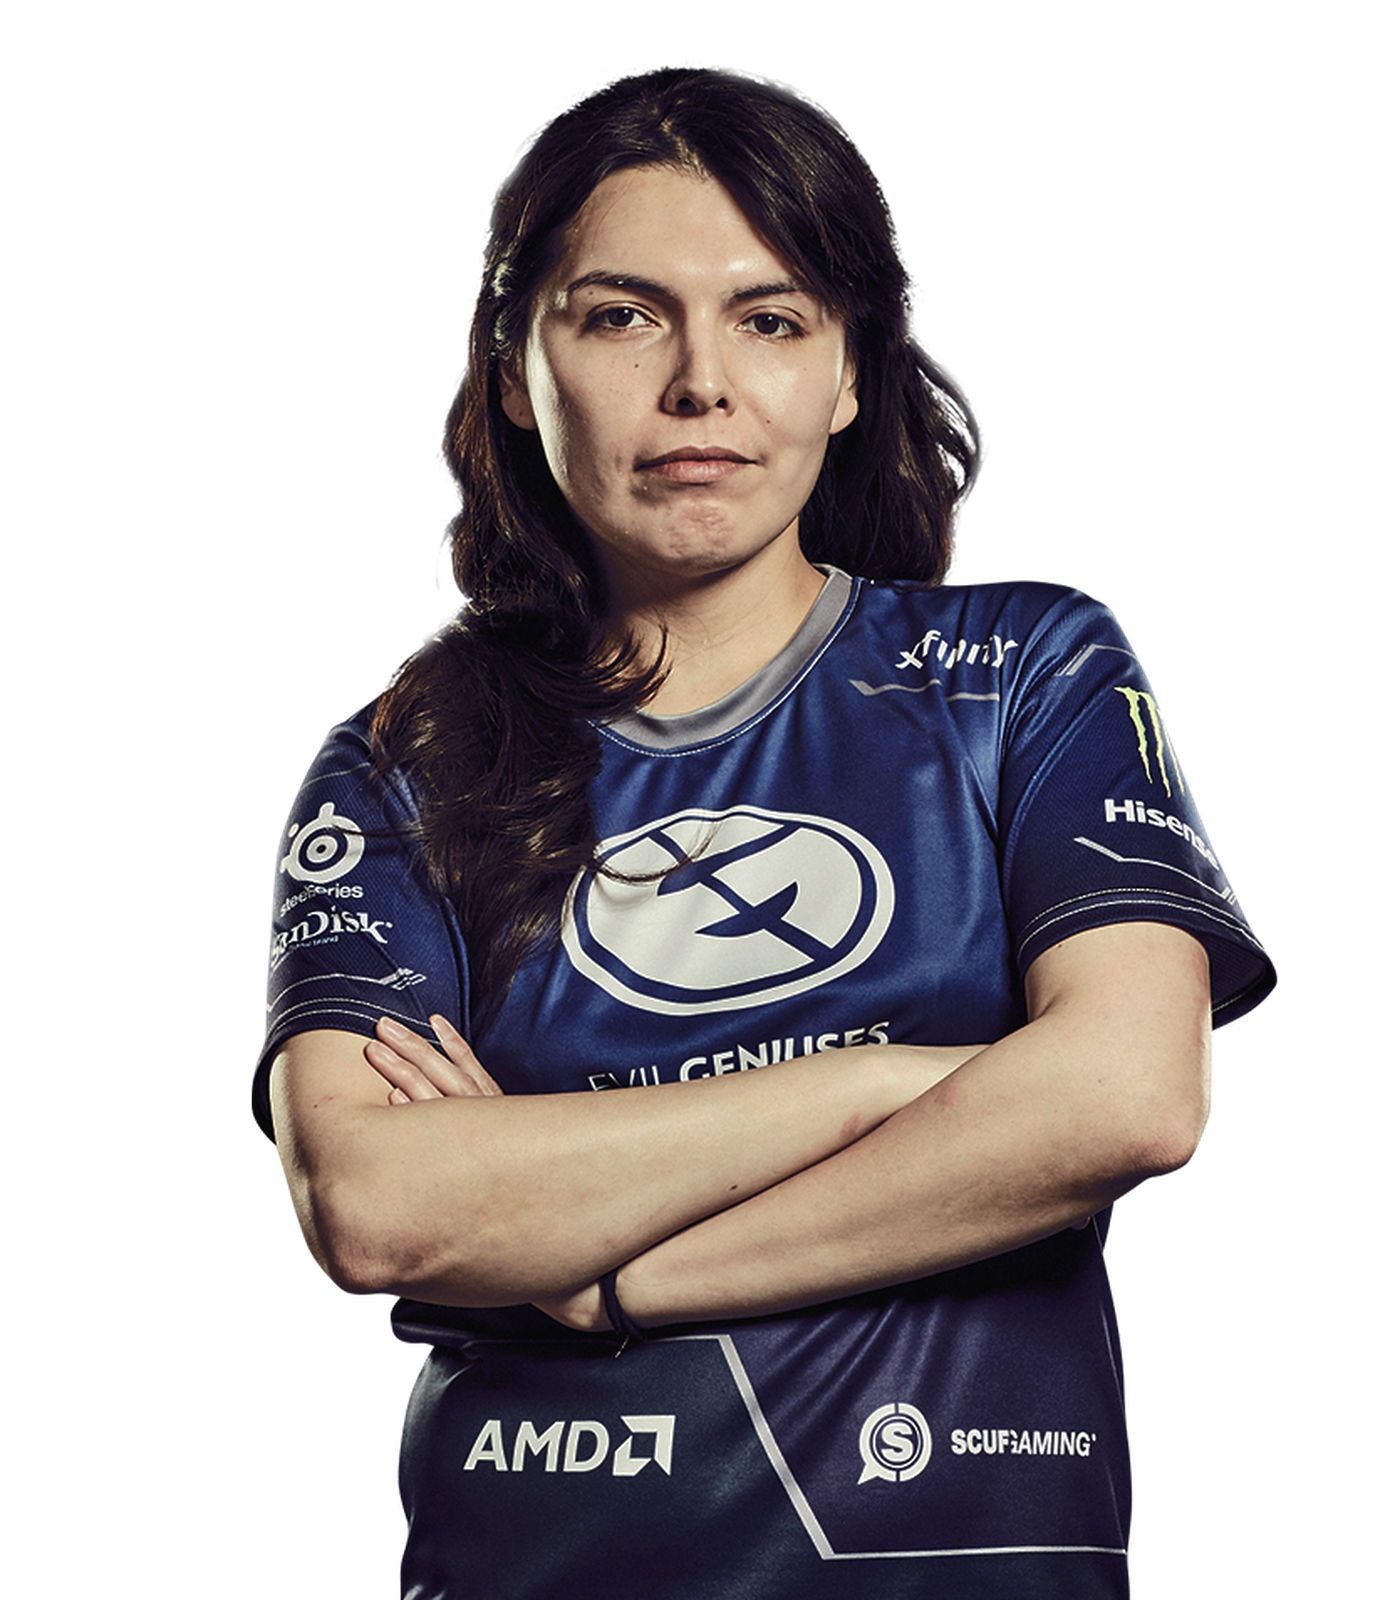 Top 10 highest earning female eSports gamers in the world image 11